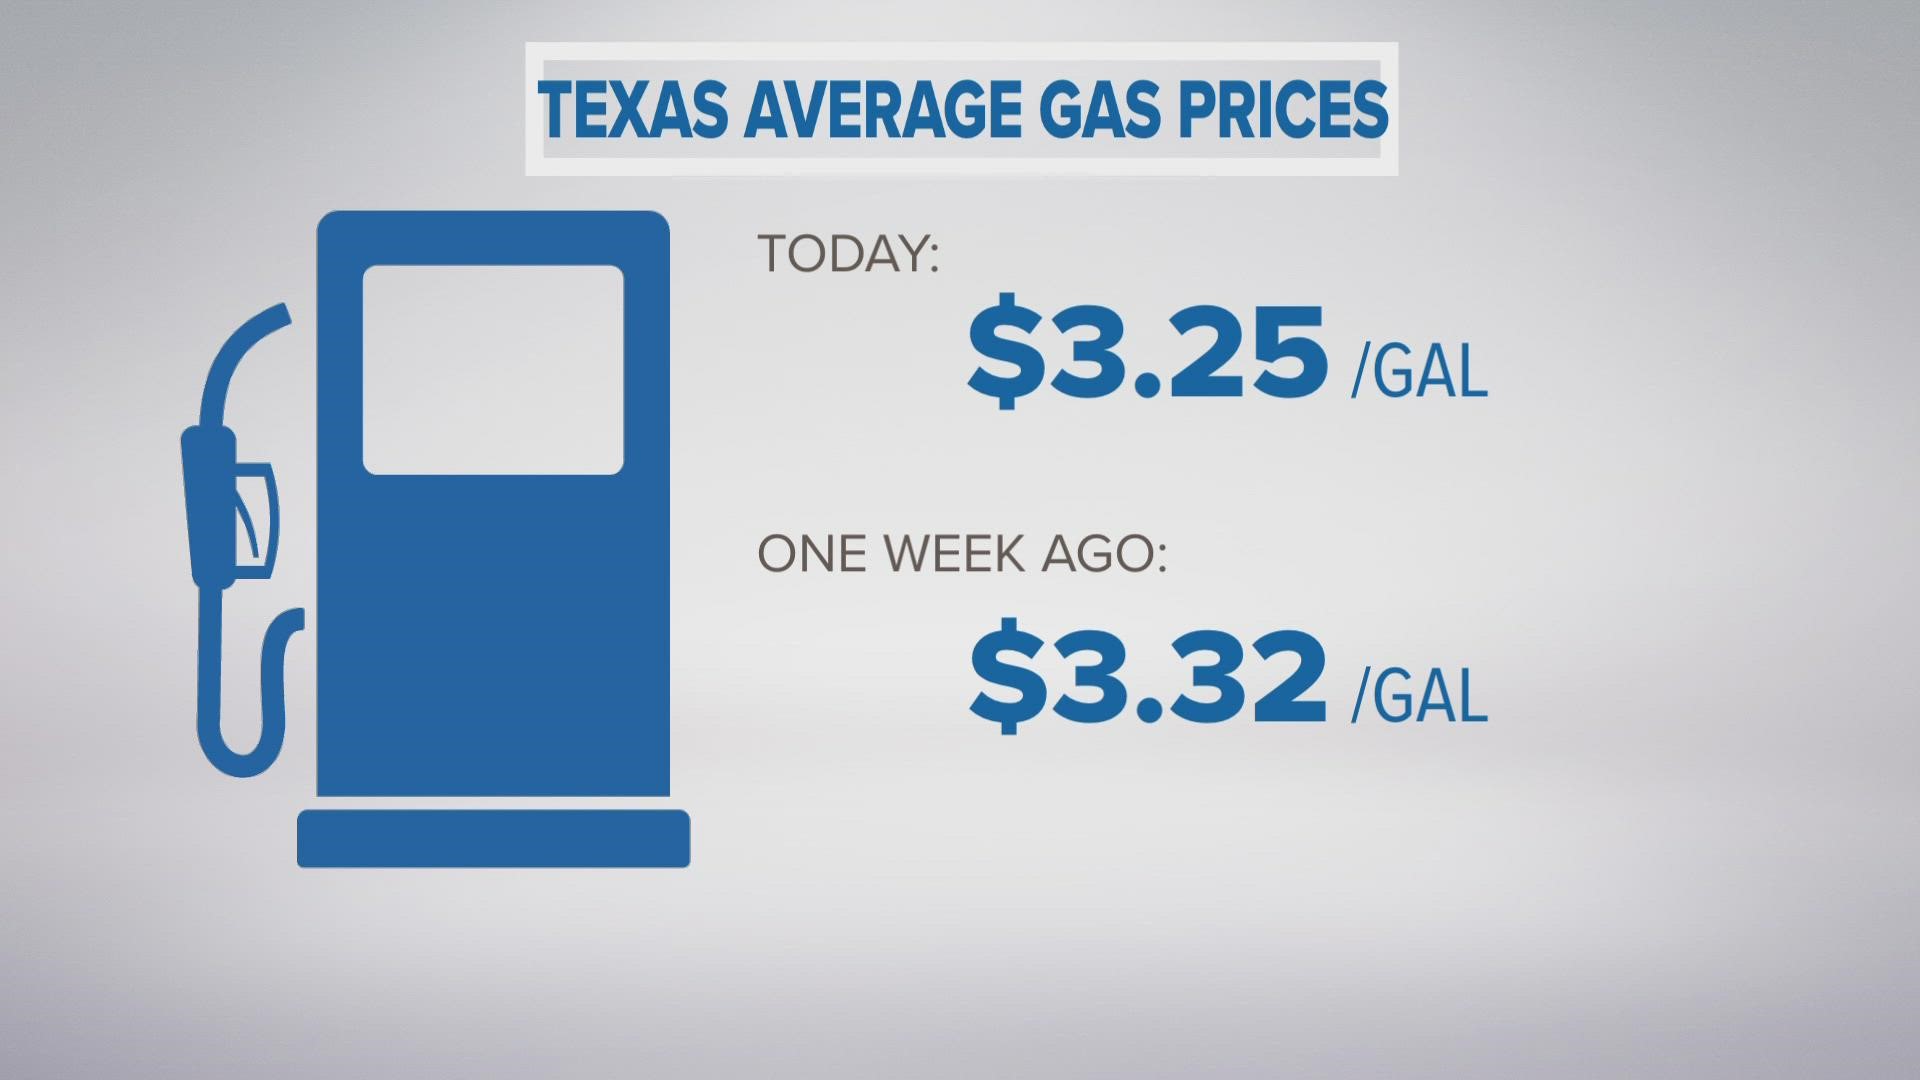 Texans are paying the second-lowest gas prices in the country with a state average of $3.25 per gallon for regular fuel.